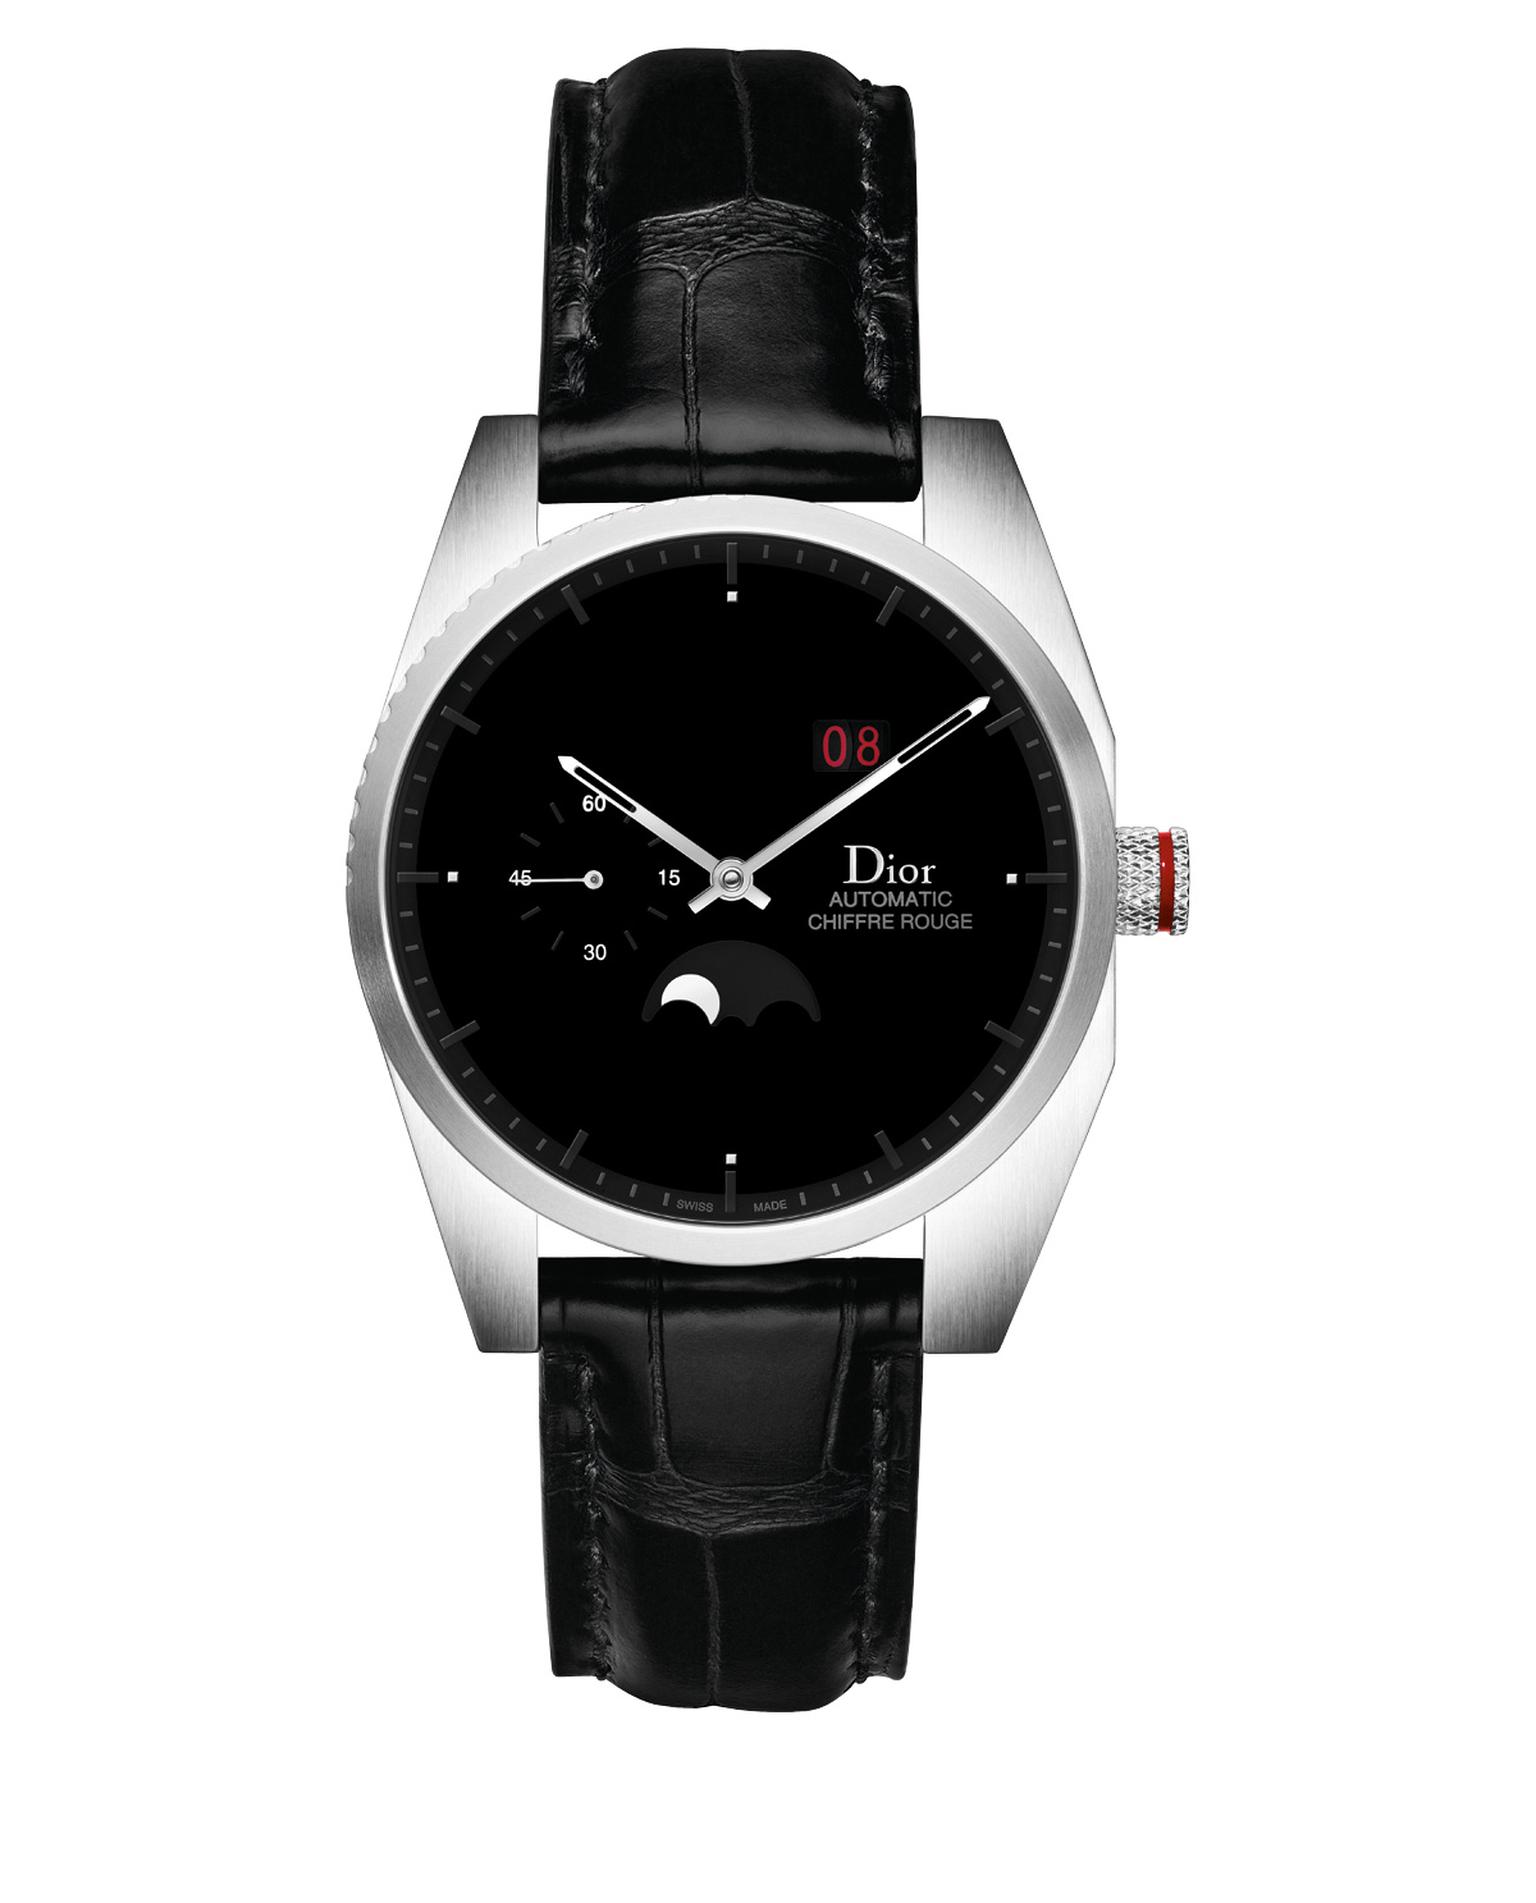 Dior Chiffre Rouge Moonphase_20130926_Zoom